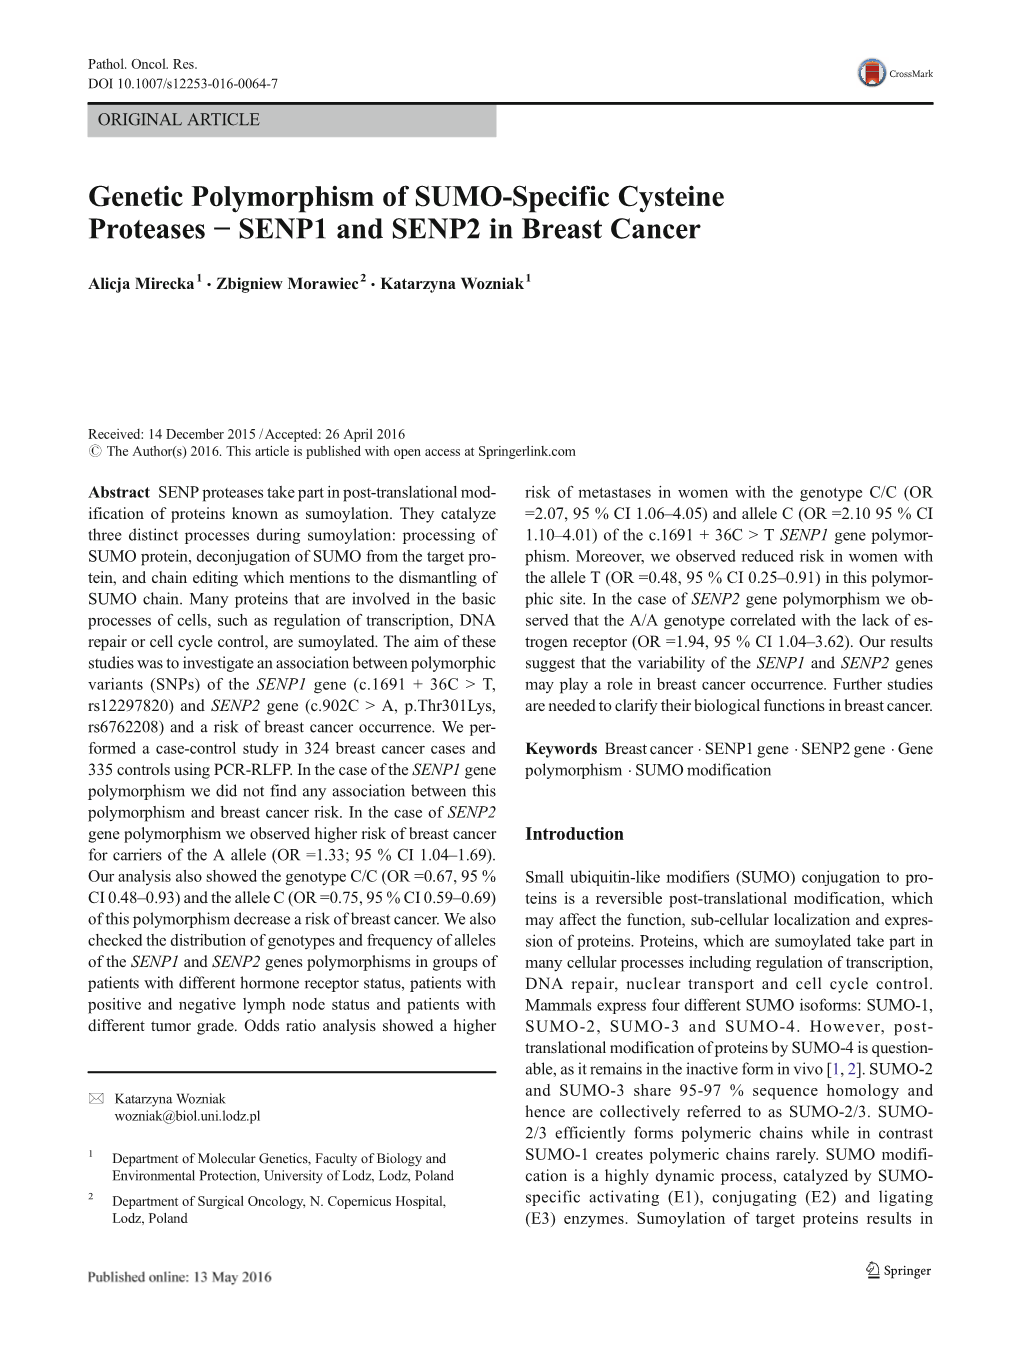 Genetic Polymorphism of SUMO-Specific Cysteine Proteases − SENP1 and SENP2 in Breast Cancer